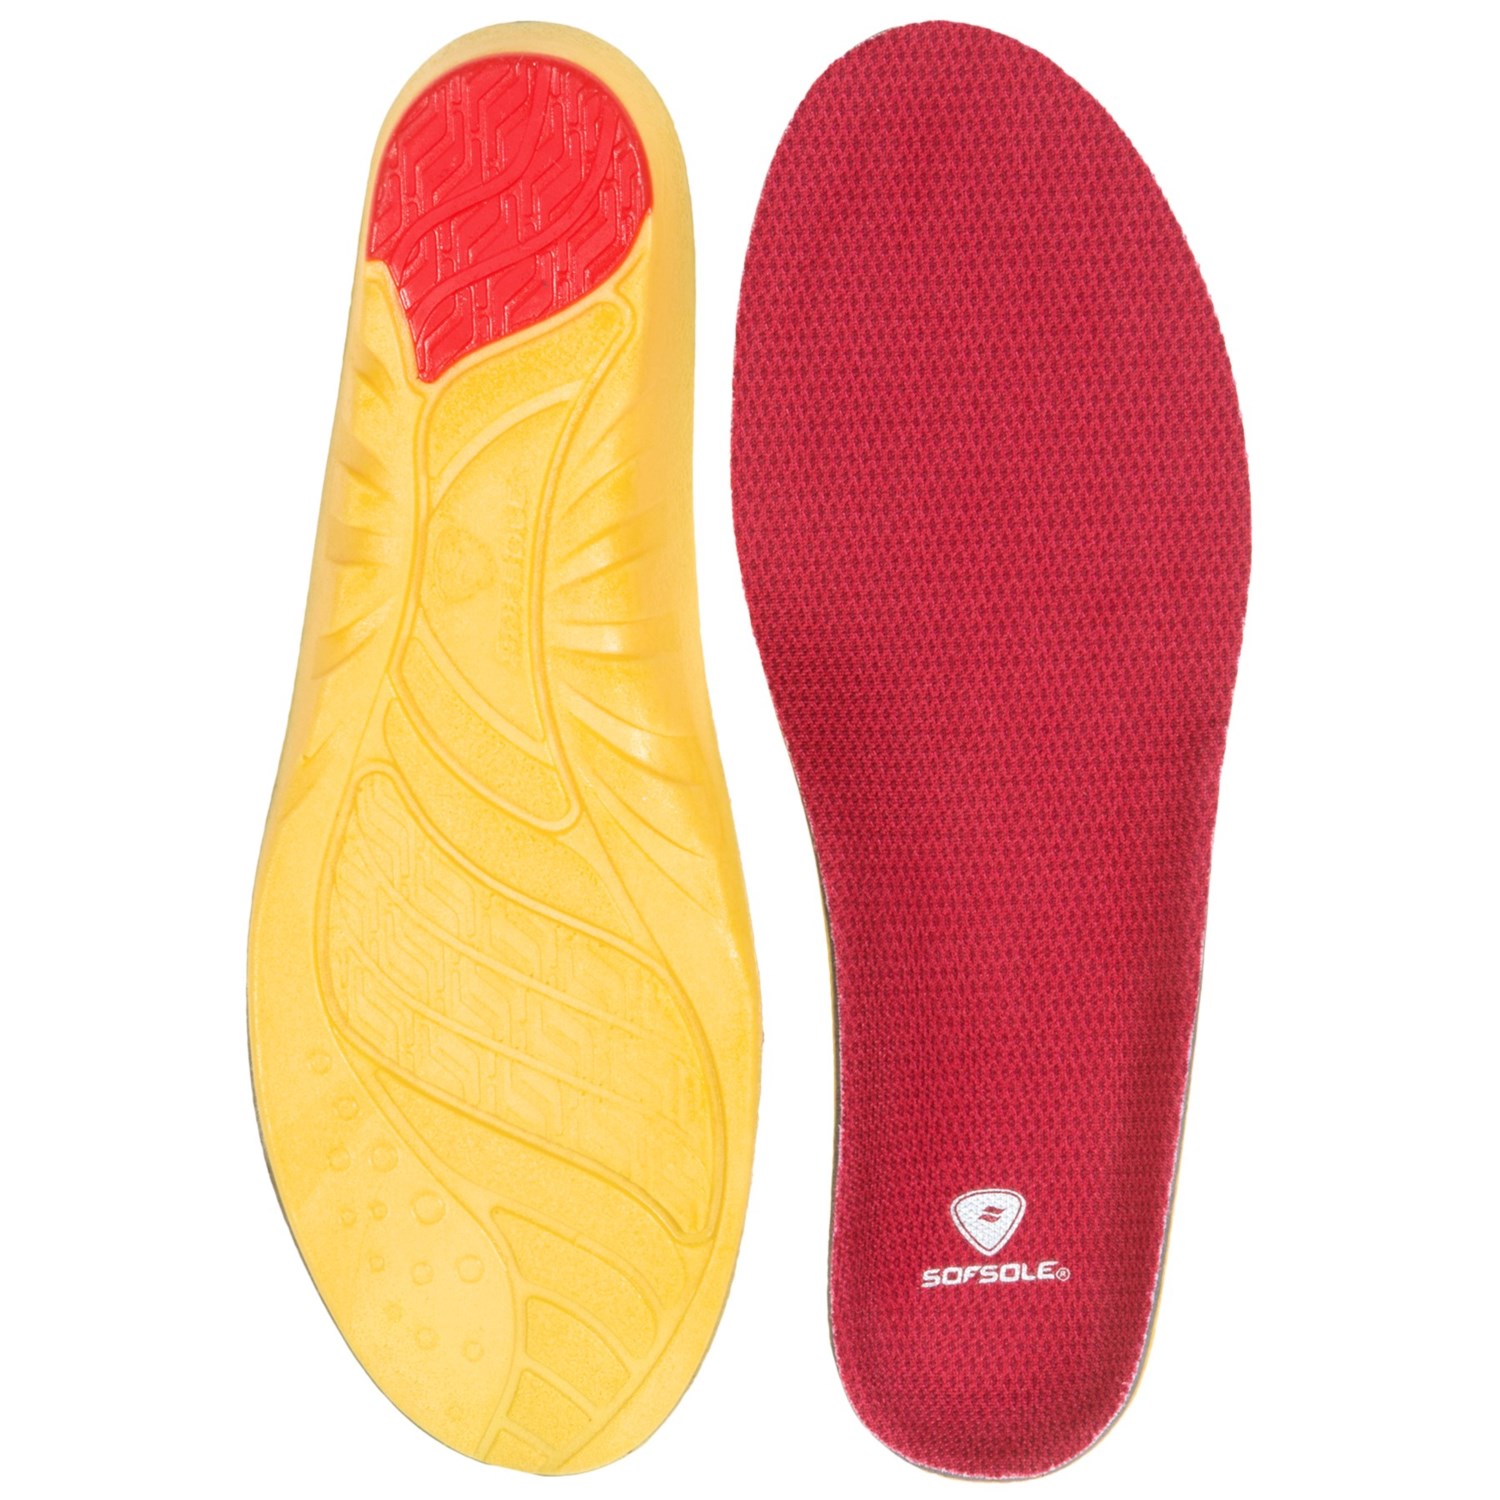 Sof Sole Arch Performance Insoles (For Men) 3450C Save 10